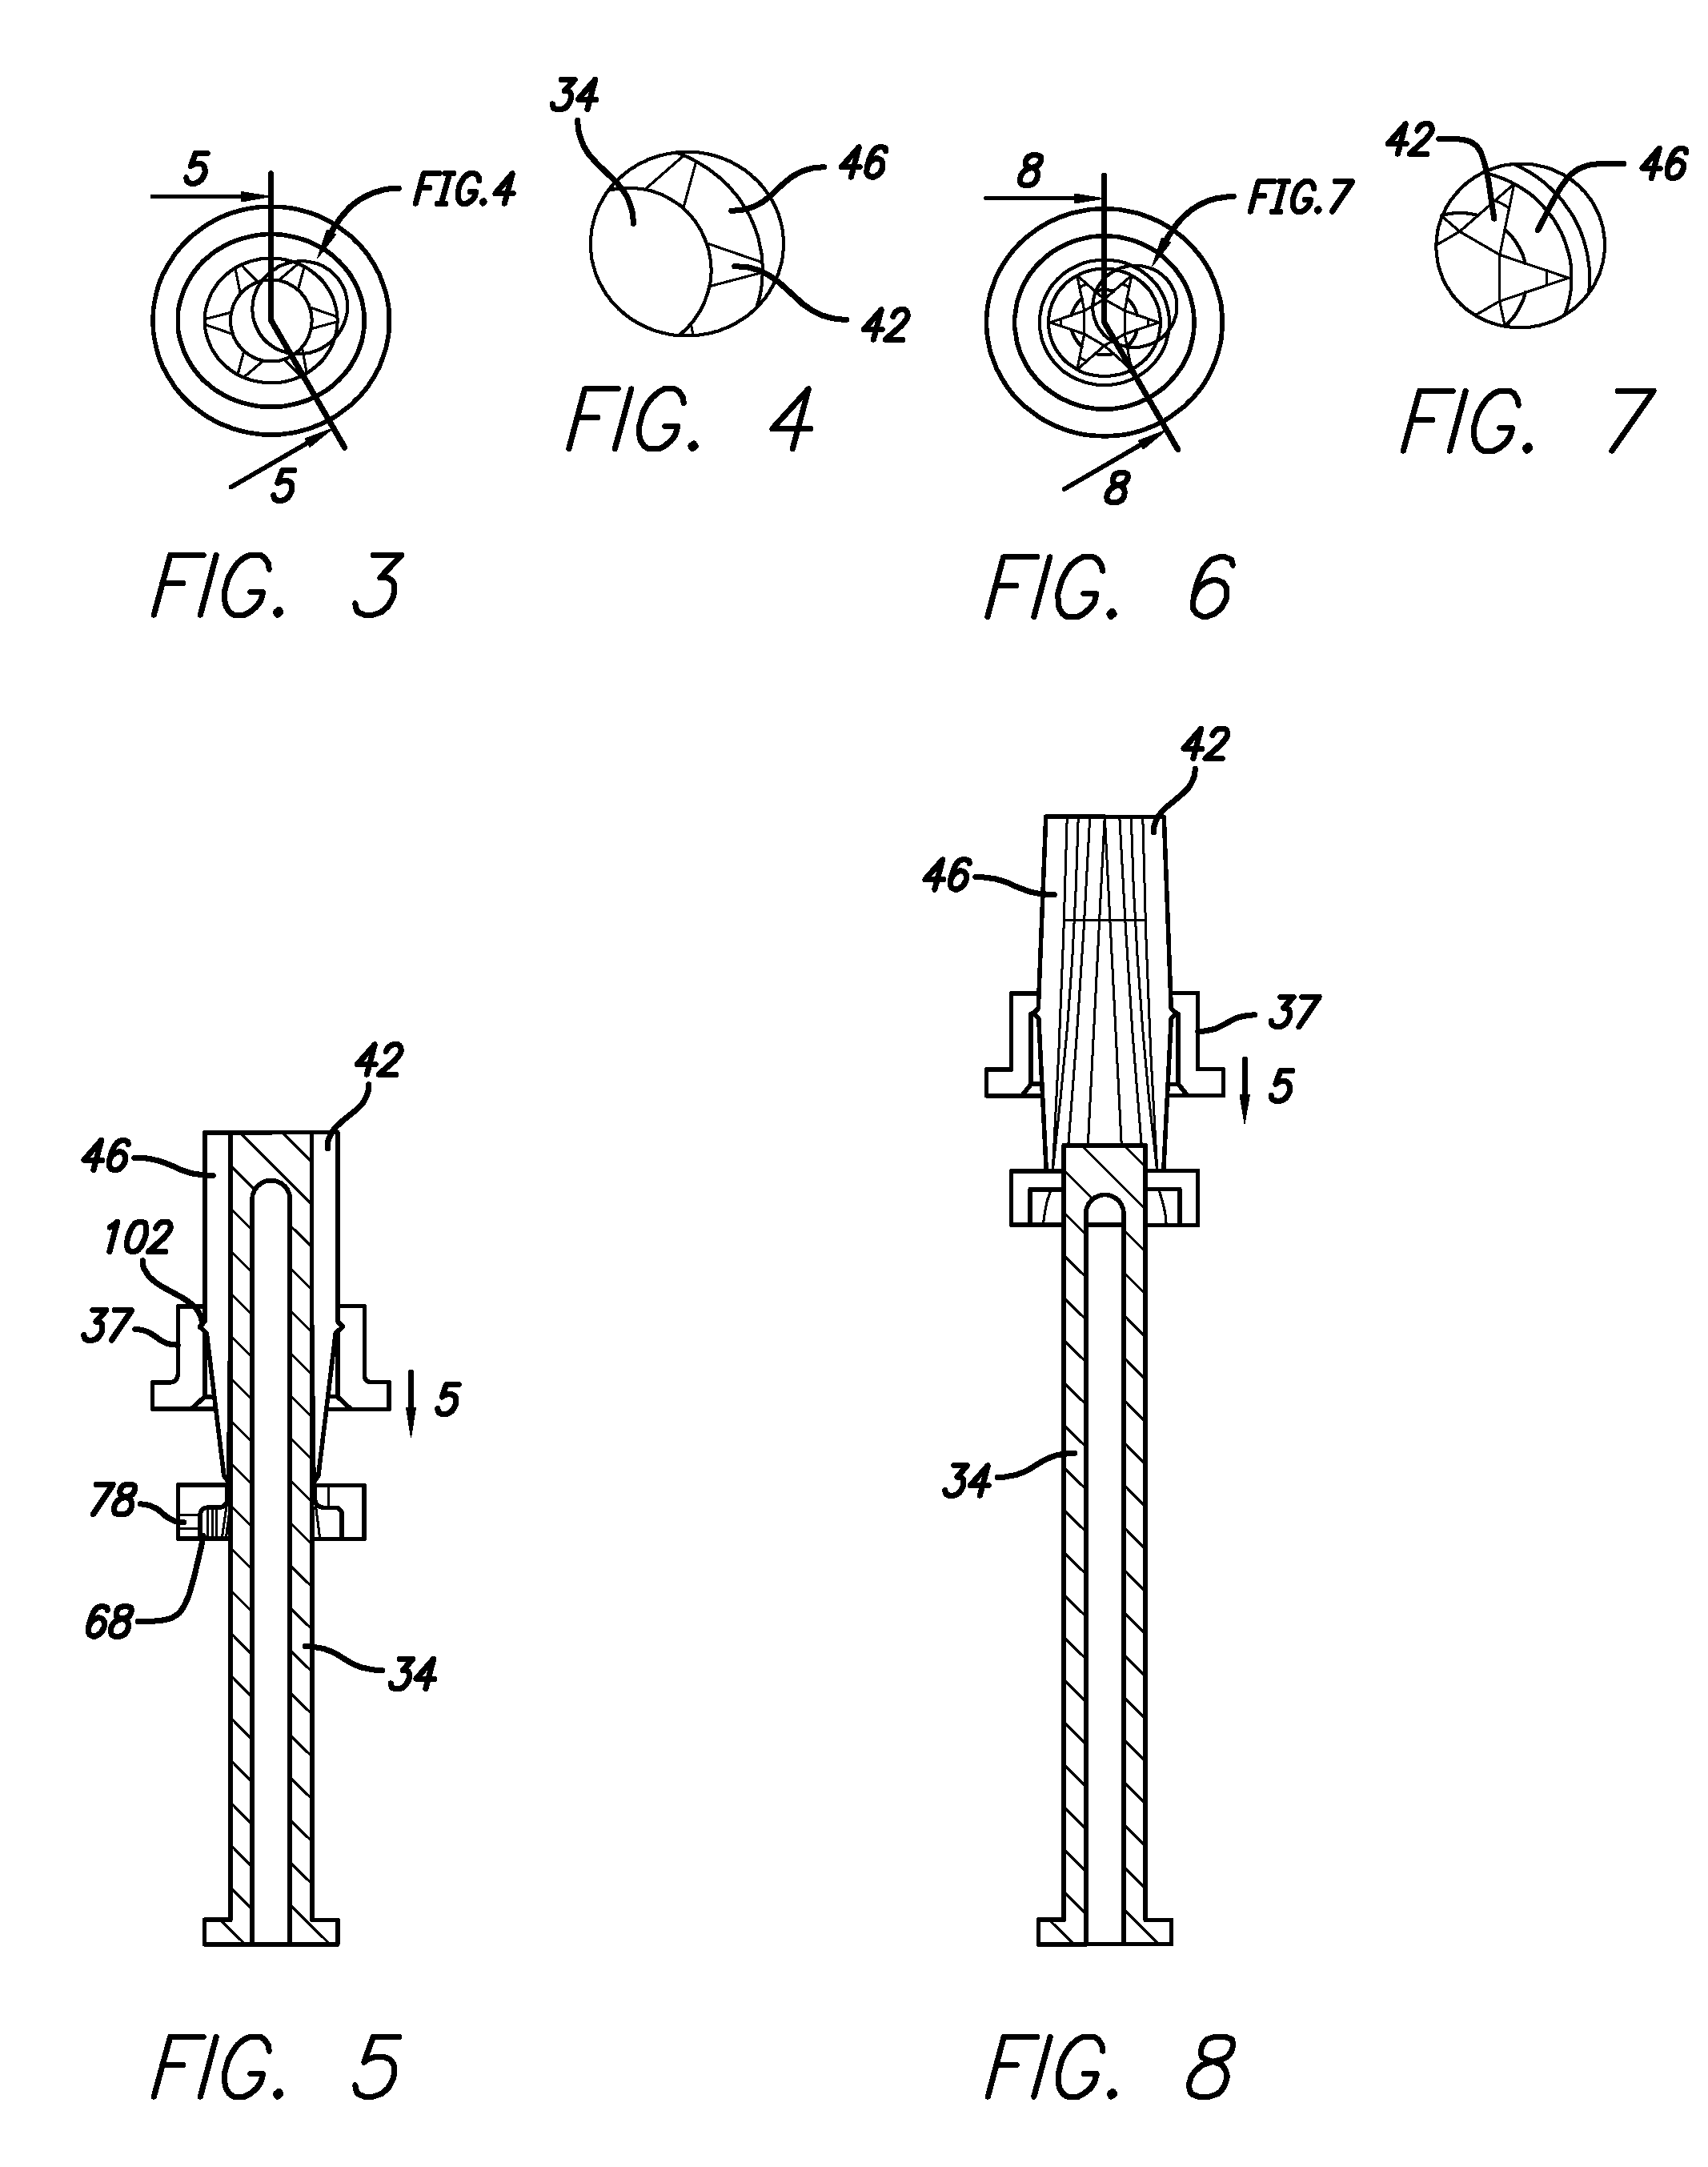 Collapsible core assembly for a molding apparatus